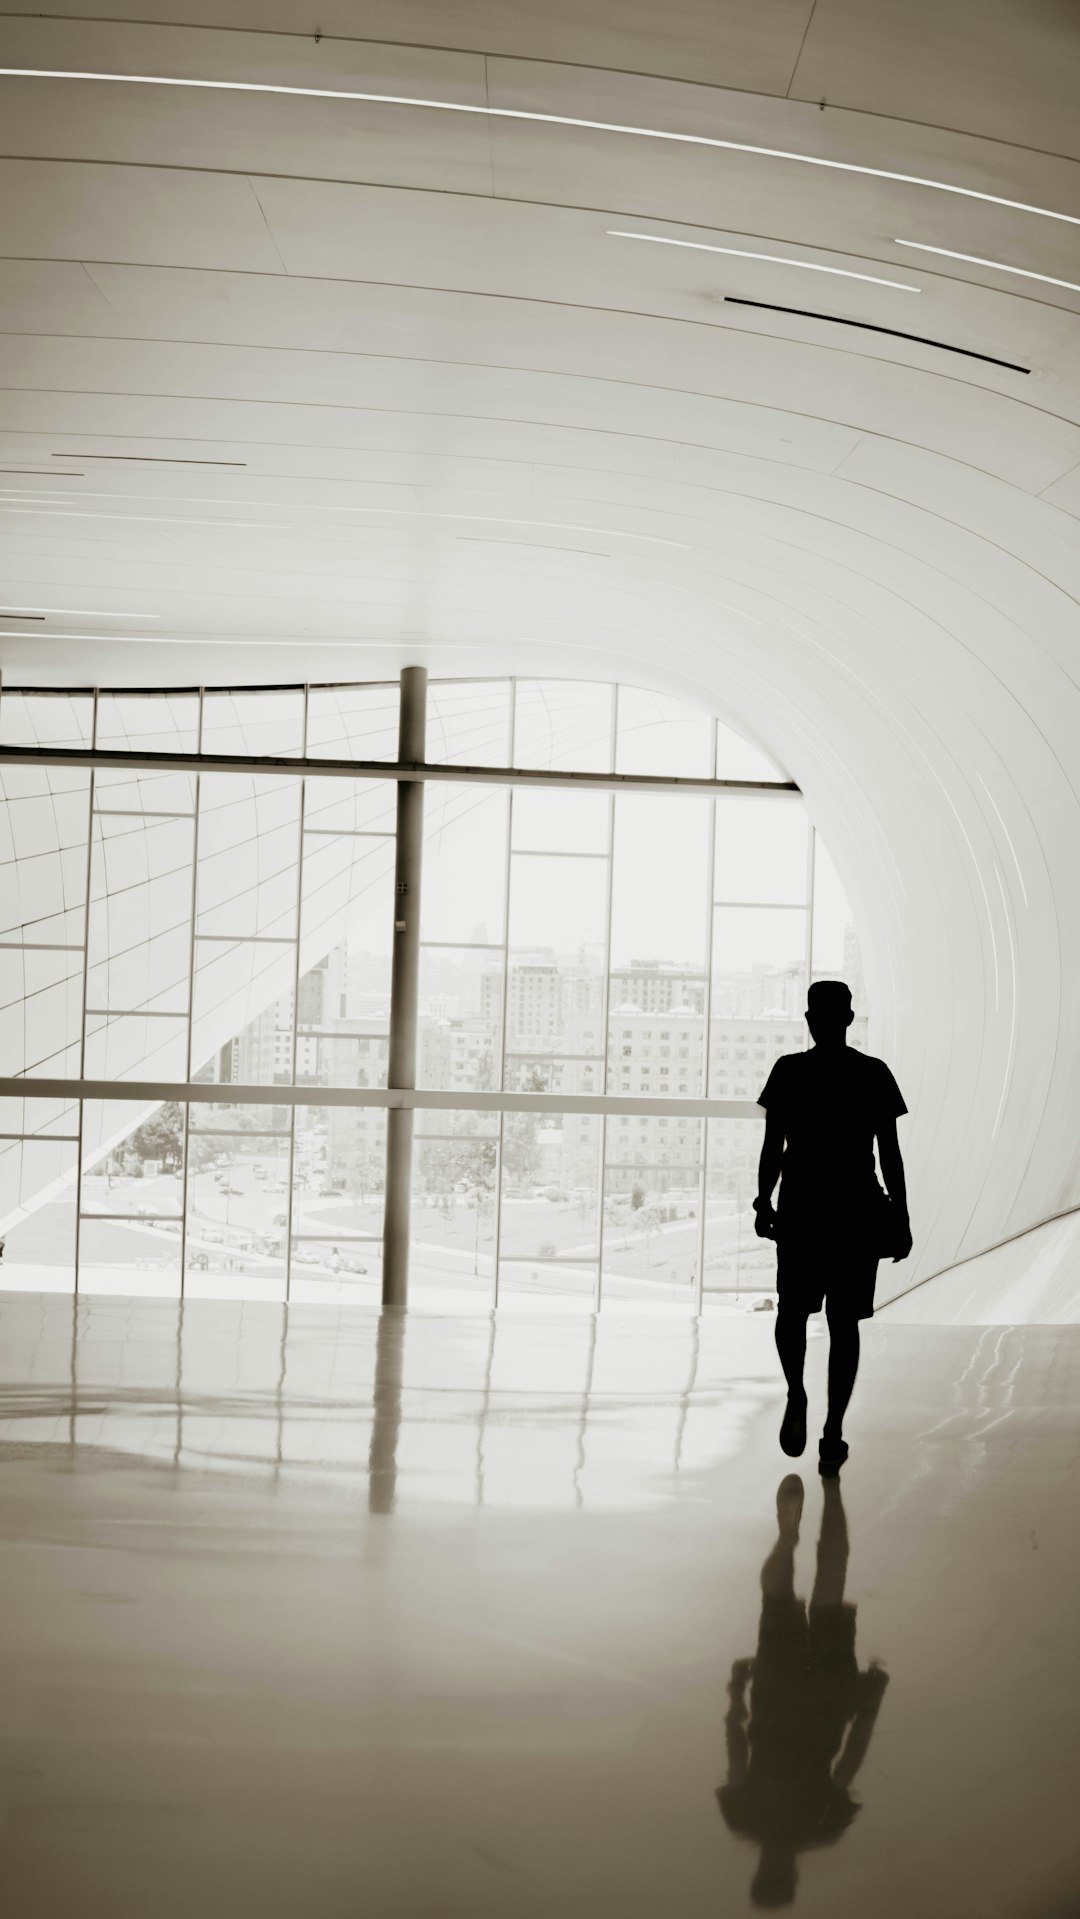 silhouette of person walking inside building